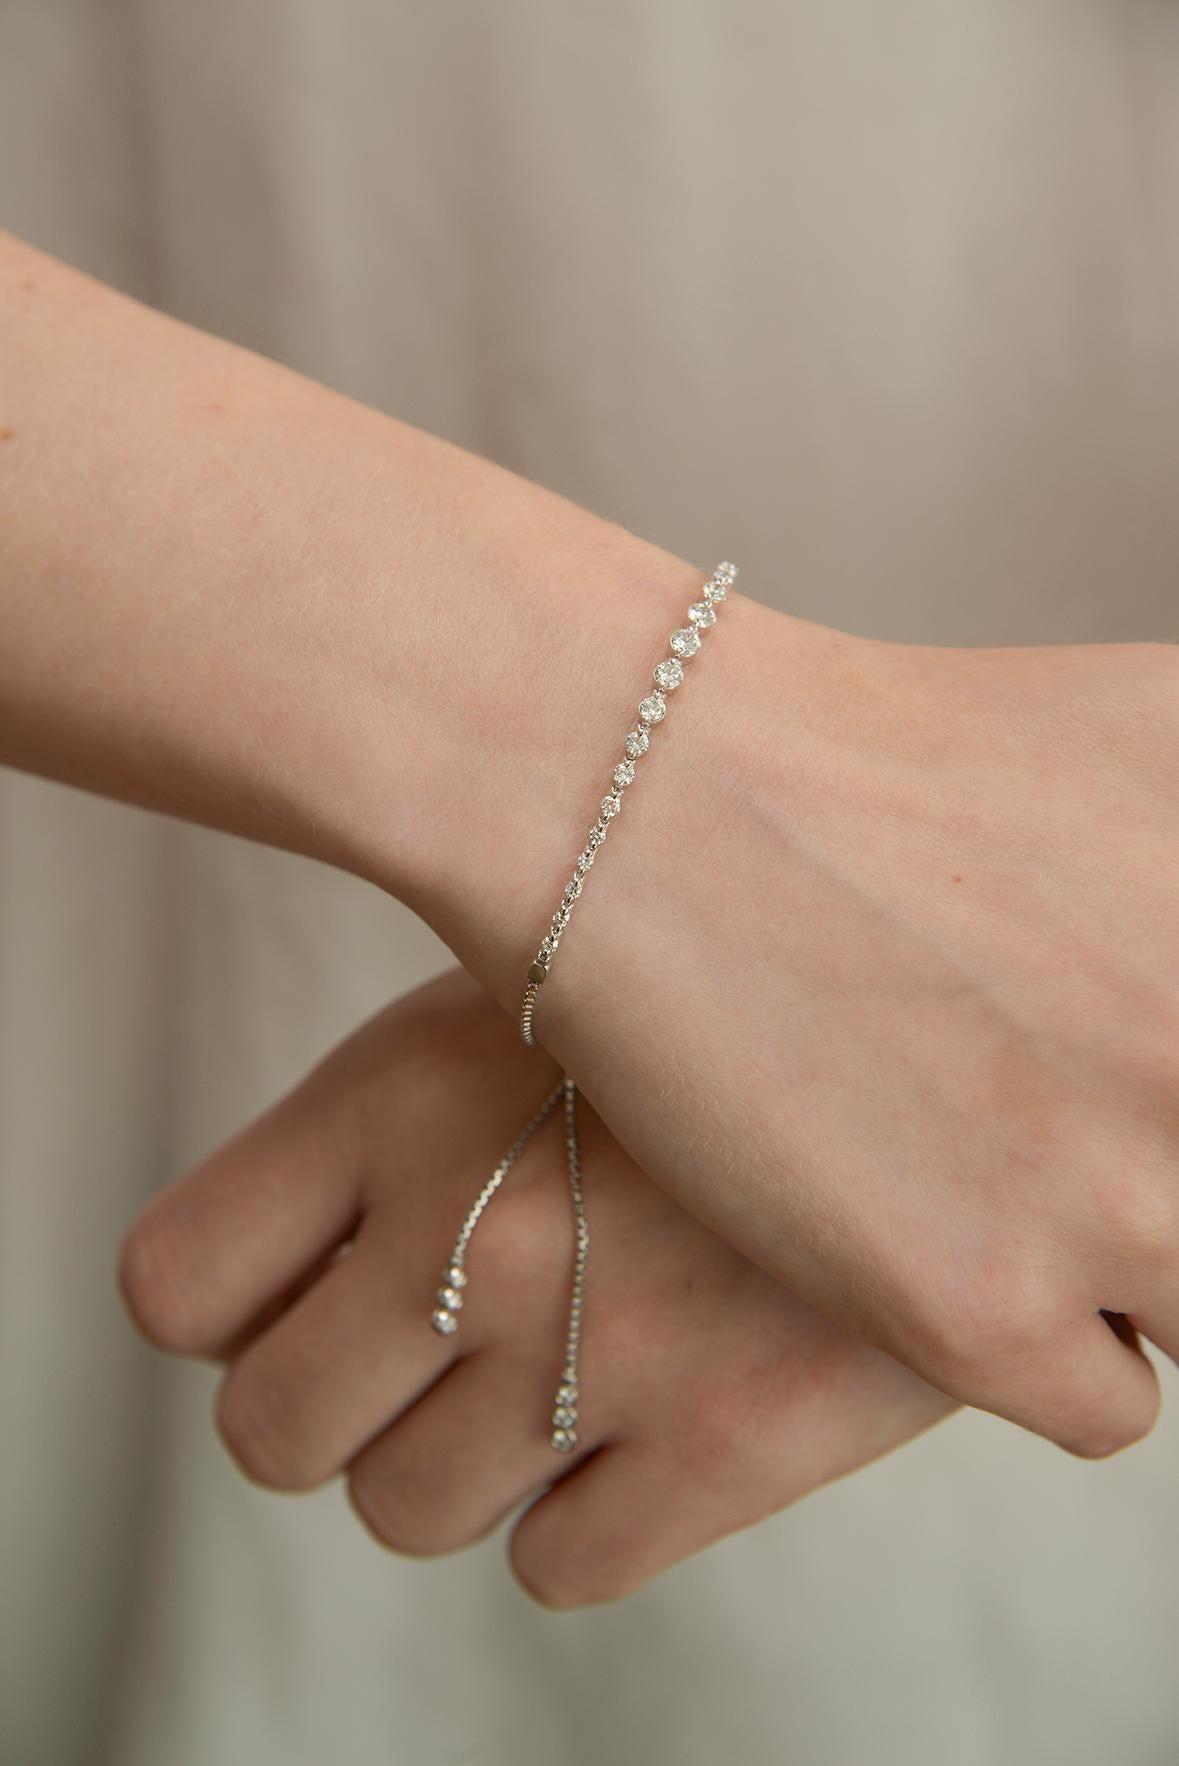 A new twist on the diamond tennis bracelet. The Diamond string bracelet featuring 1.25 brilliant cut diamonds in 18k white gold with geometric clasp.
Adjustable sizing